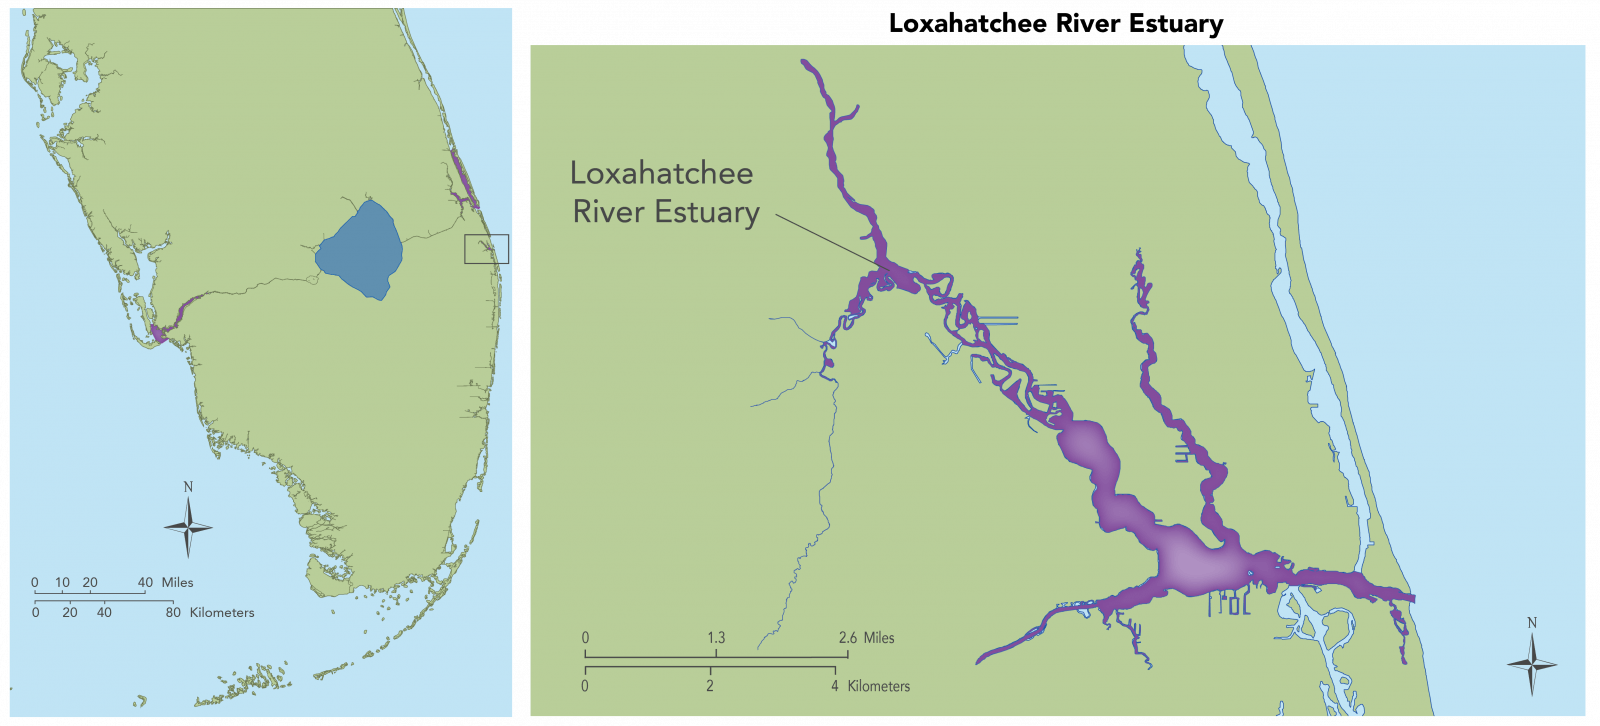 Map of the Loxahatchee River Estuary area. Shows an overview map and a magnified view.